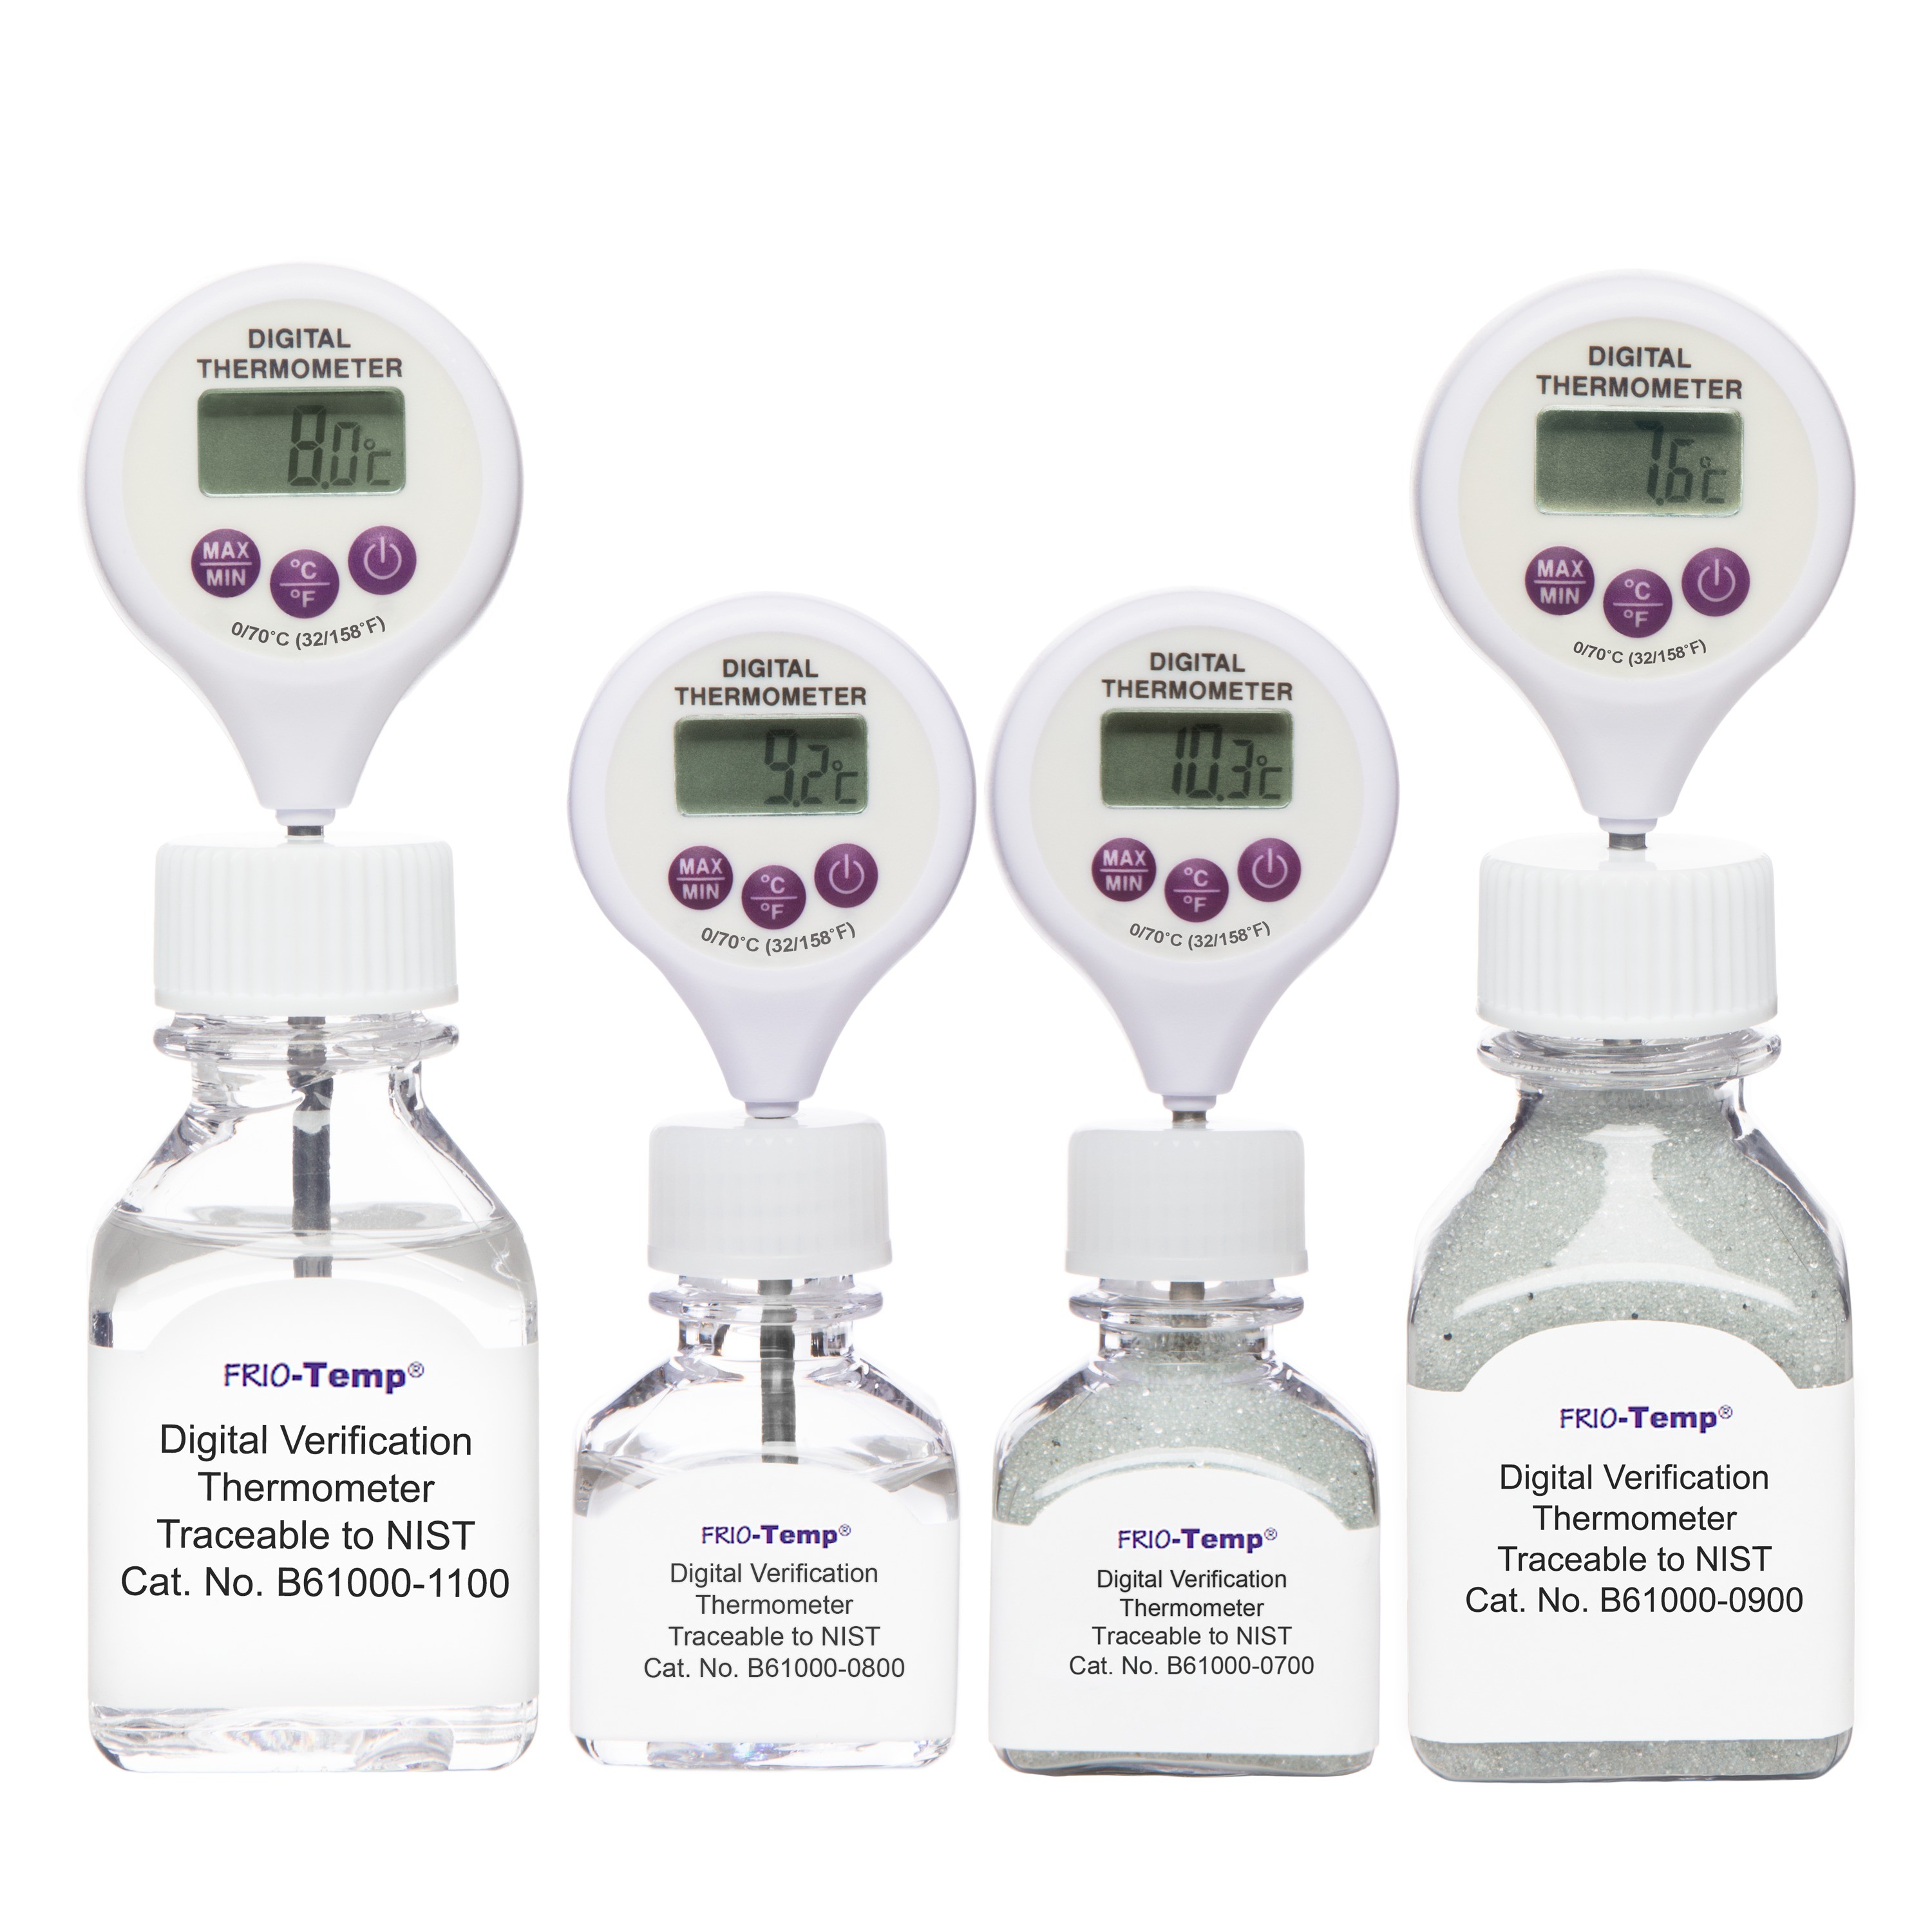 H-B Frio-Temp Calibrated Electronic Verification Lollipop Stem Thermometers for Refrigerators, Incubators and General Applications